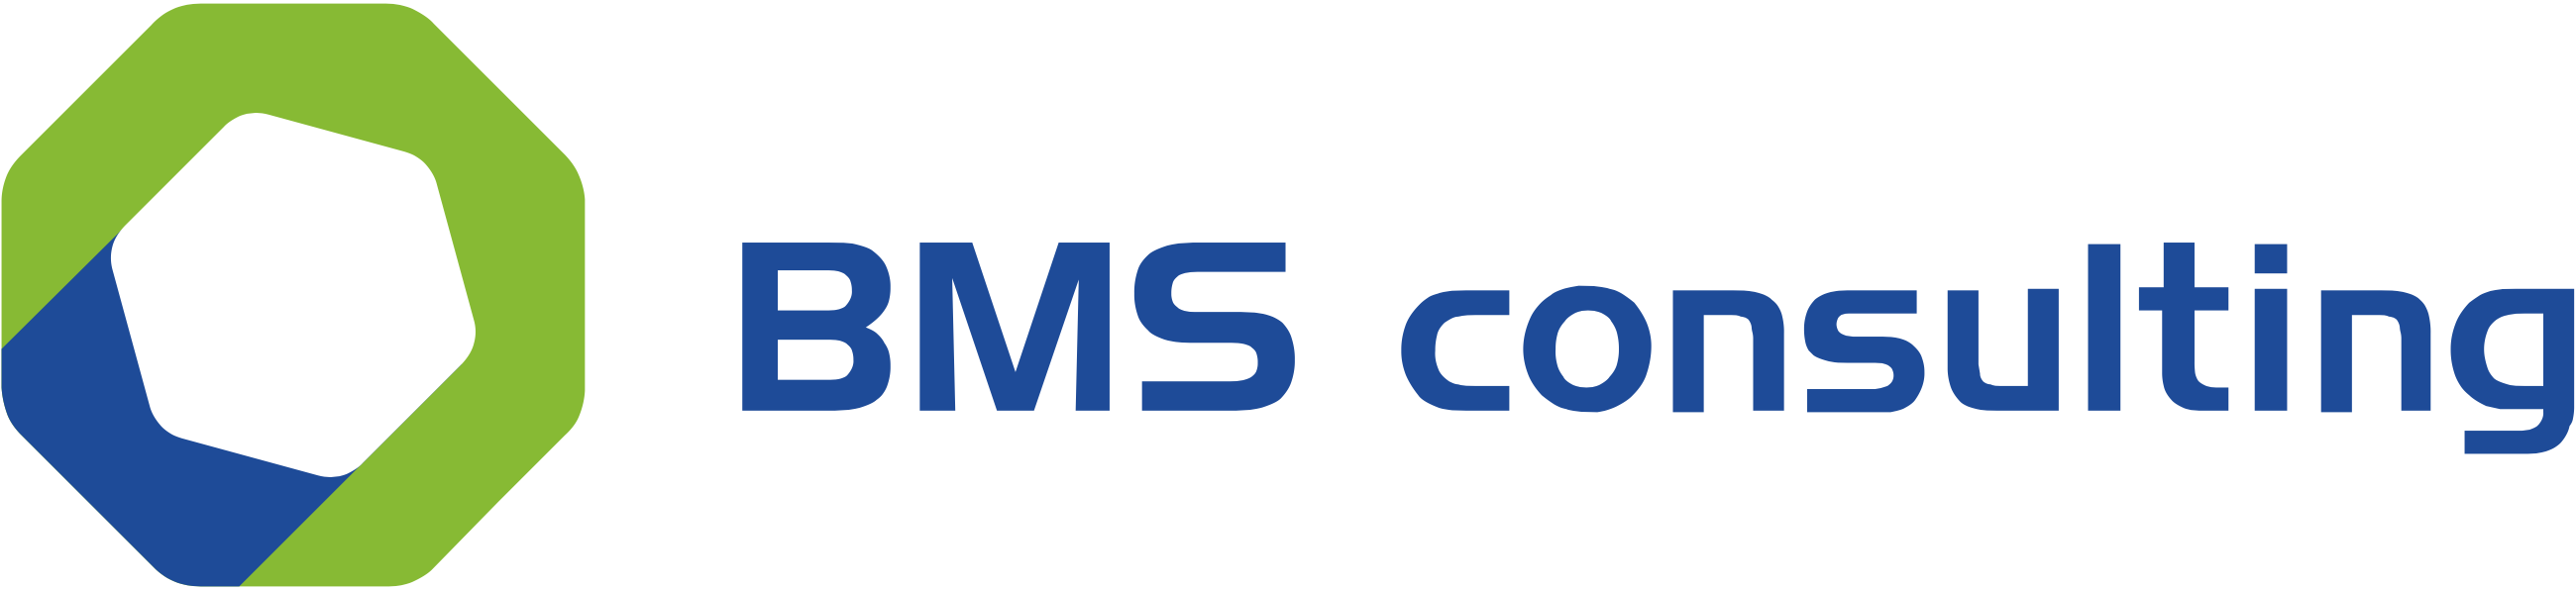 BMS Consulting logo